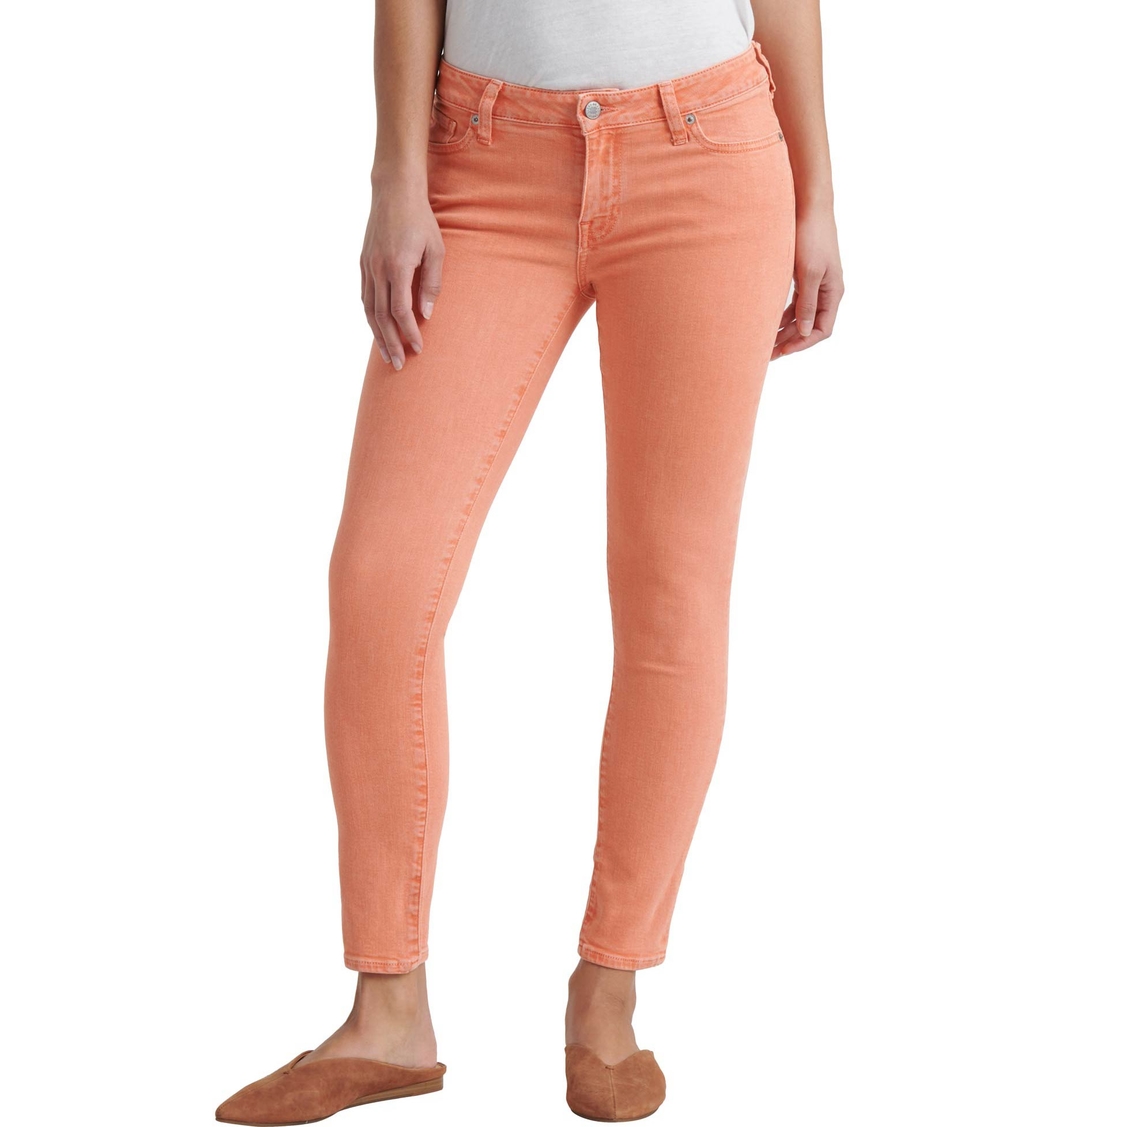 Lucky Brand Lolita Skinny Jeans | Jeans | Clothing & Accessories | Shop ...